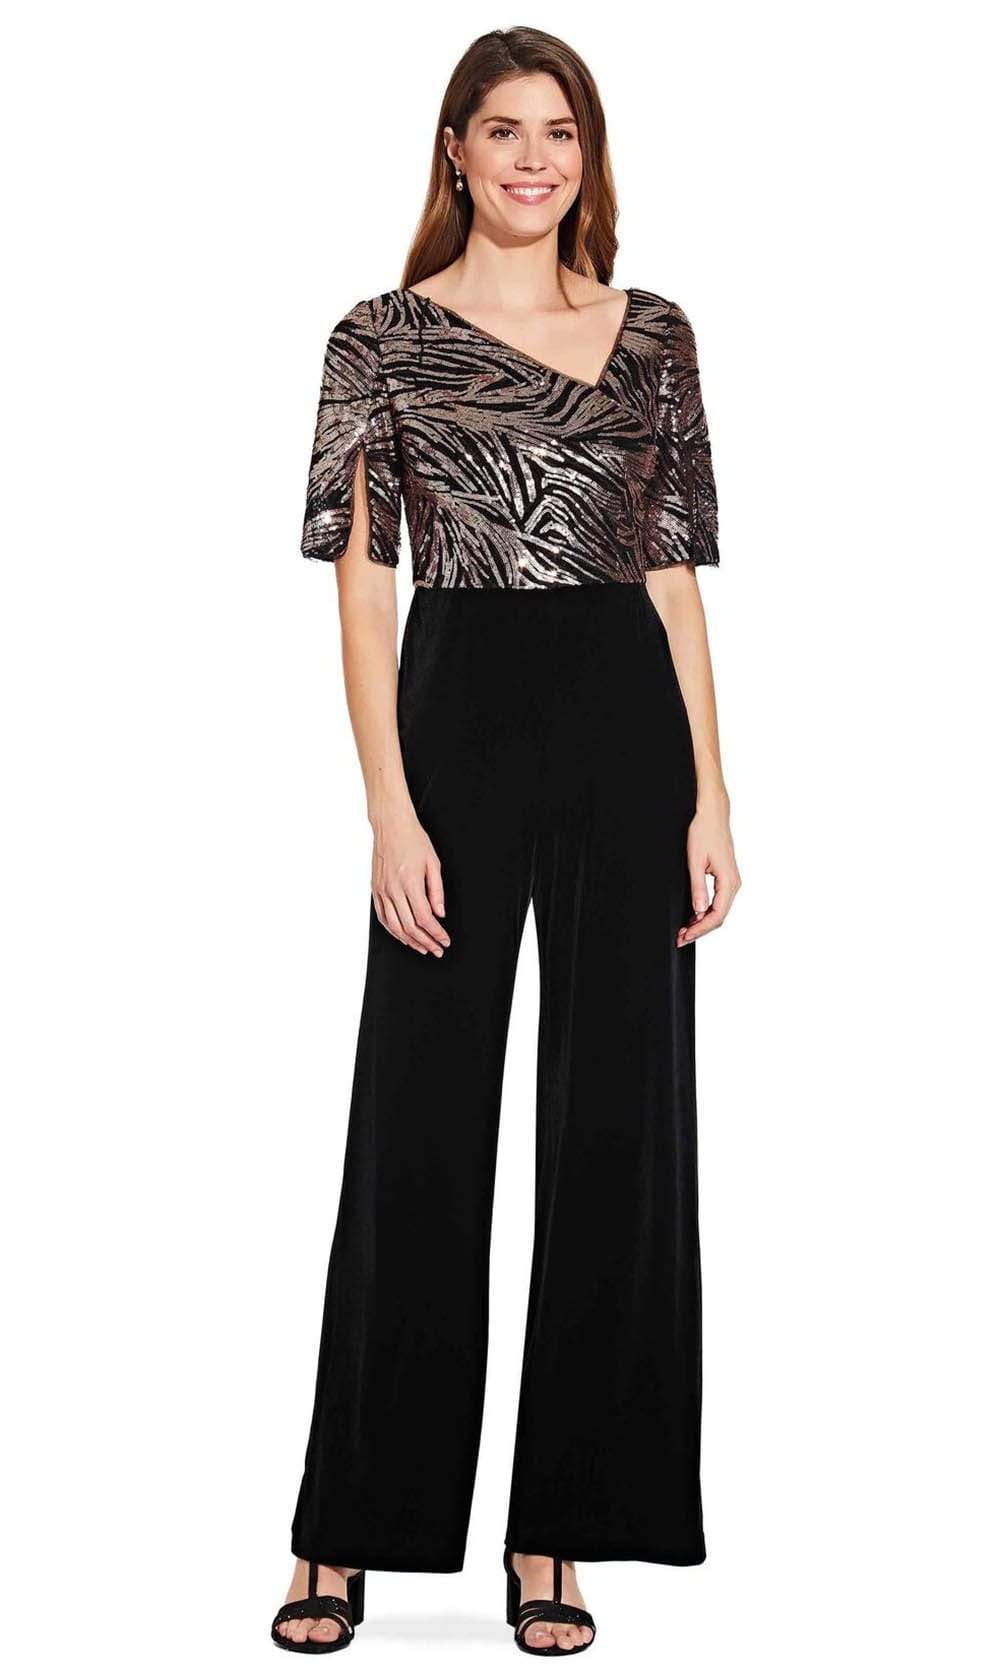 Image of Adrianna Papell - AP1E206295 Split Sleeve Sequined Bodice Jumpsuit